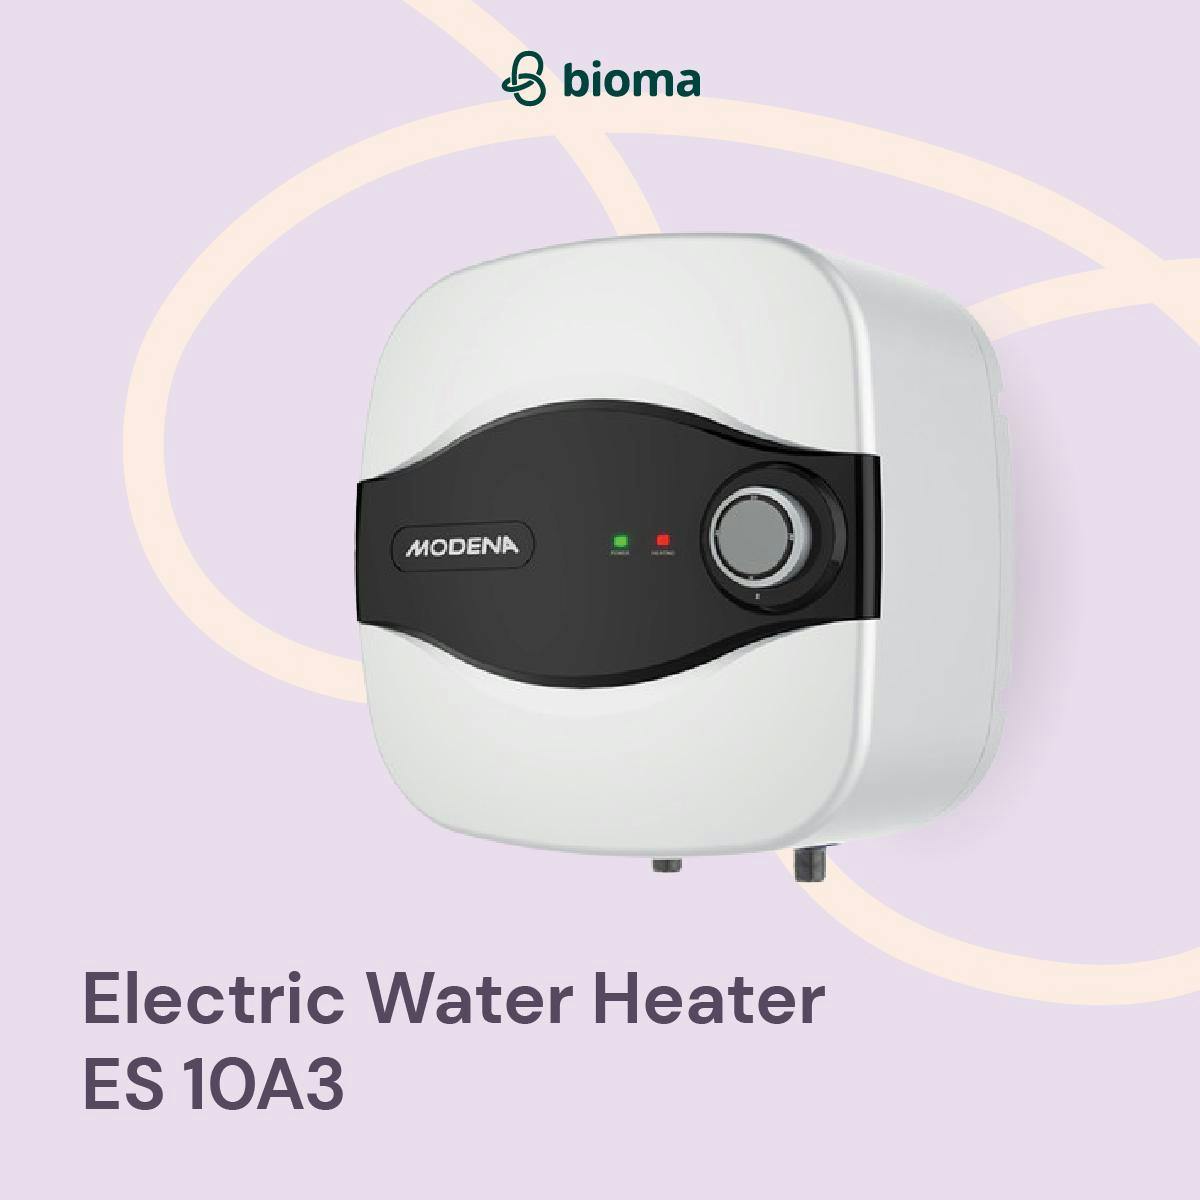 Electric Water Heater ES 10A3